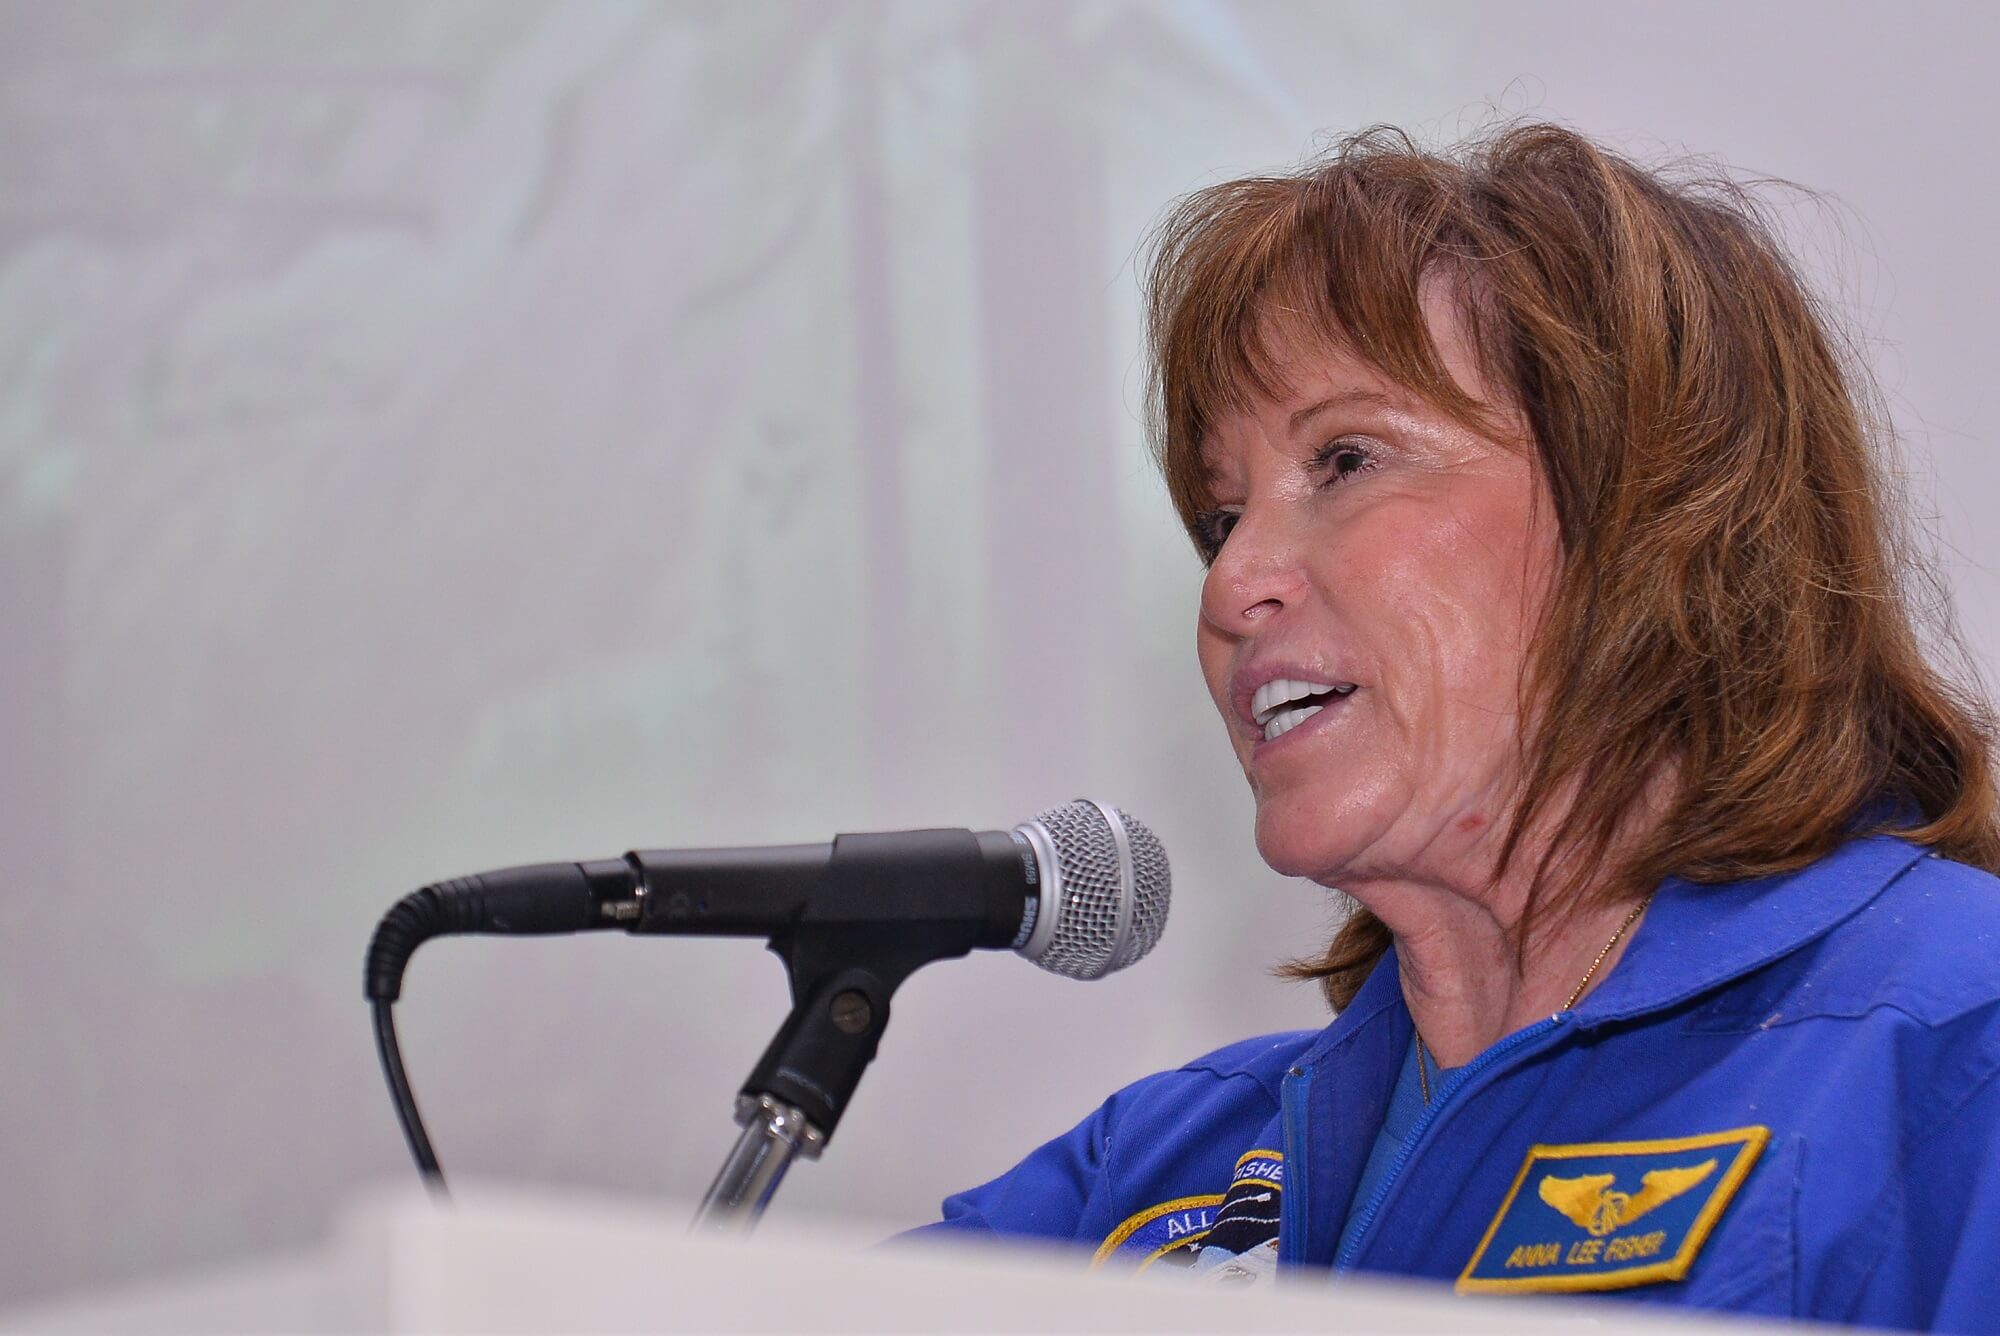 NASA’s famous retired female astronaut Anna Fisher meets high school students at Near East University